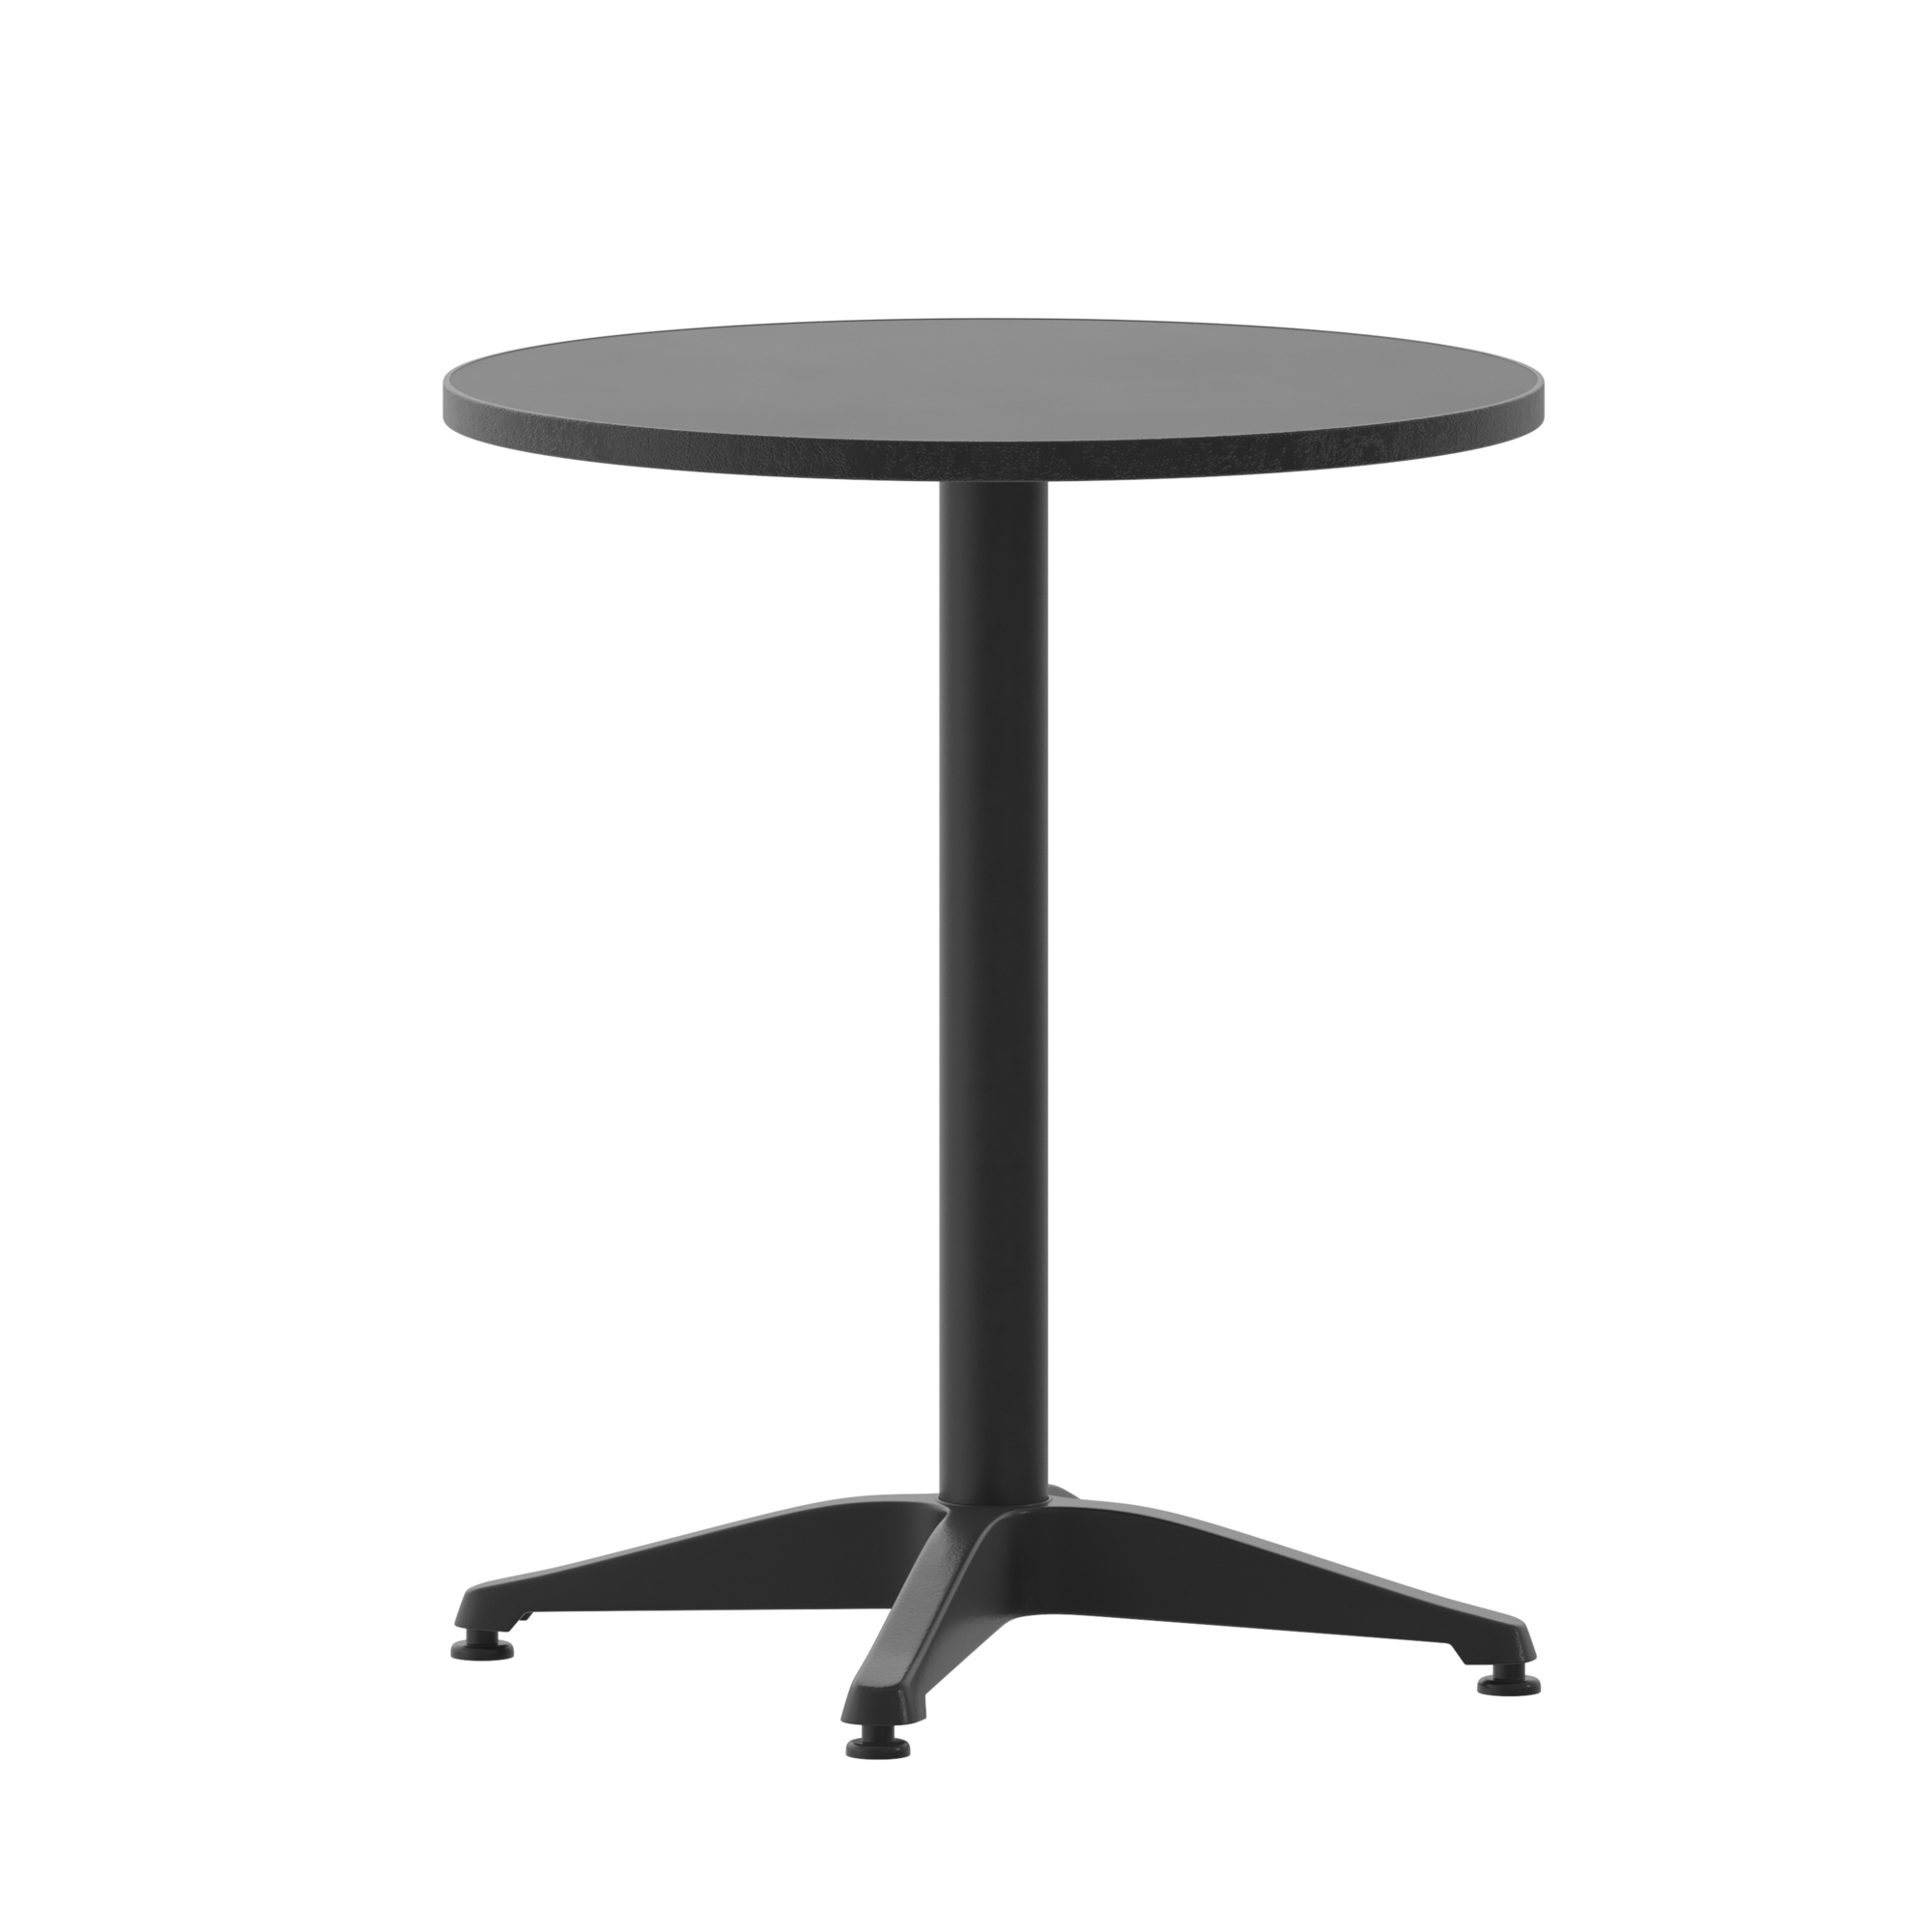 Flash Furniture, 23.5RD Black Metal Indoor-Outdoor Table w/ Base, Table Shape Round, Primary Color Black, Height 27.5 in, Model TLH0521BK